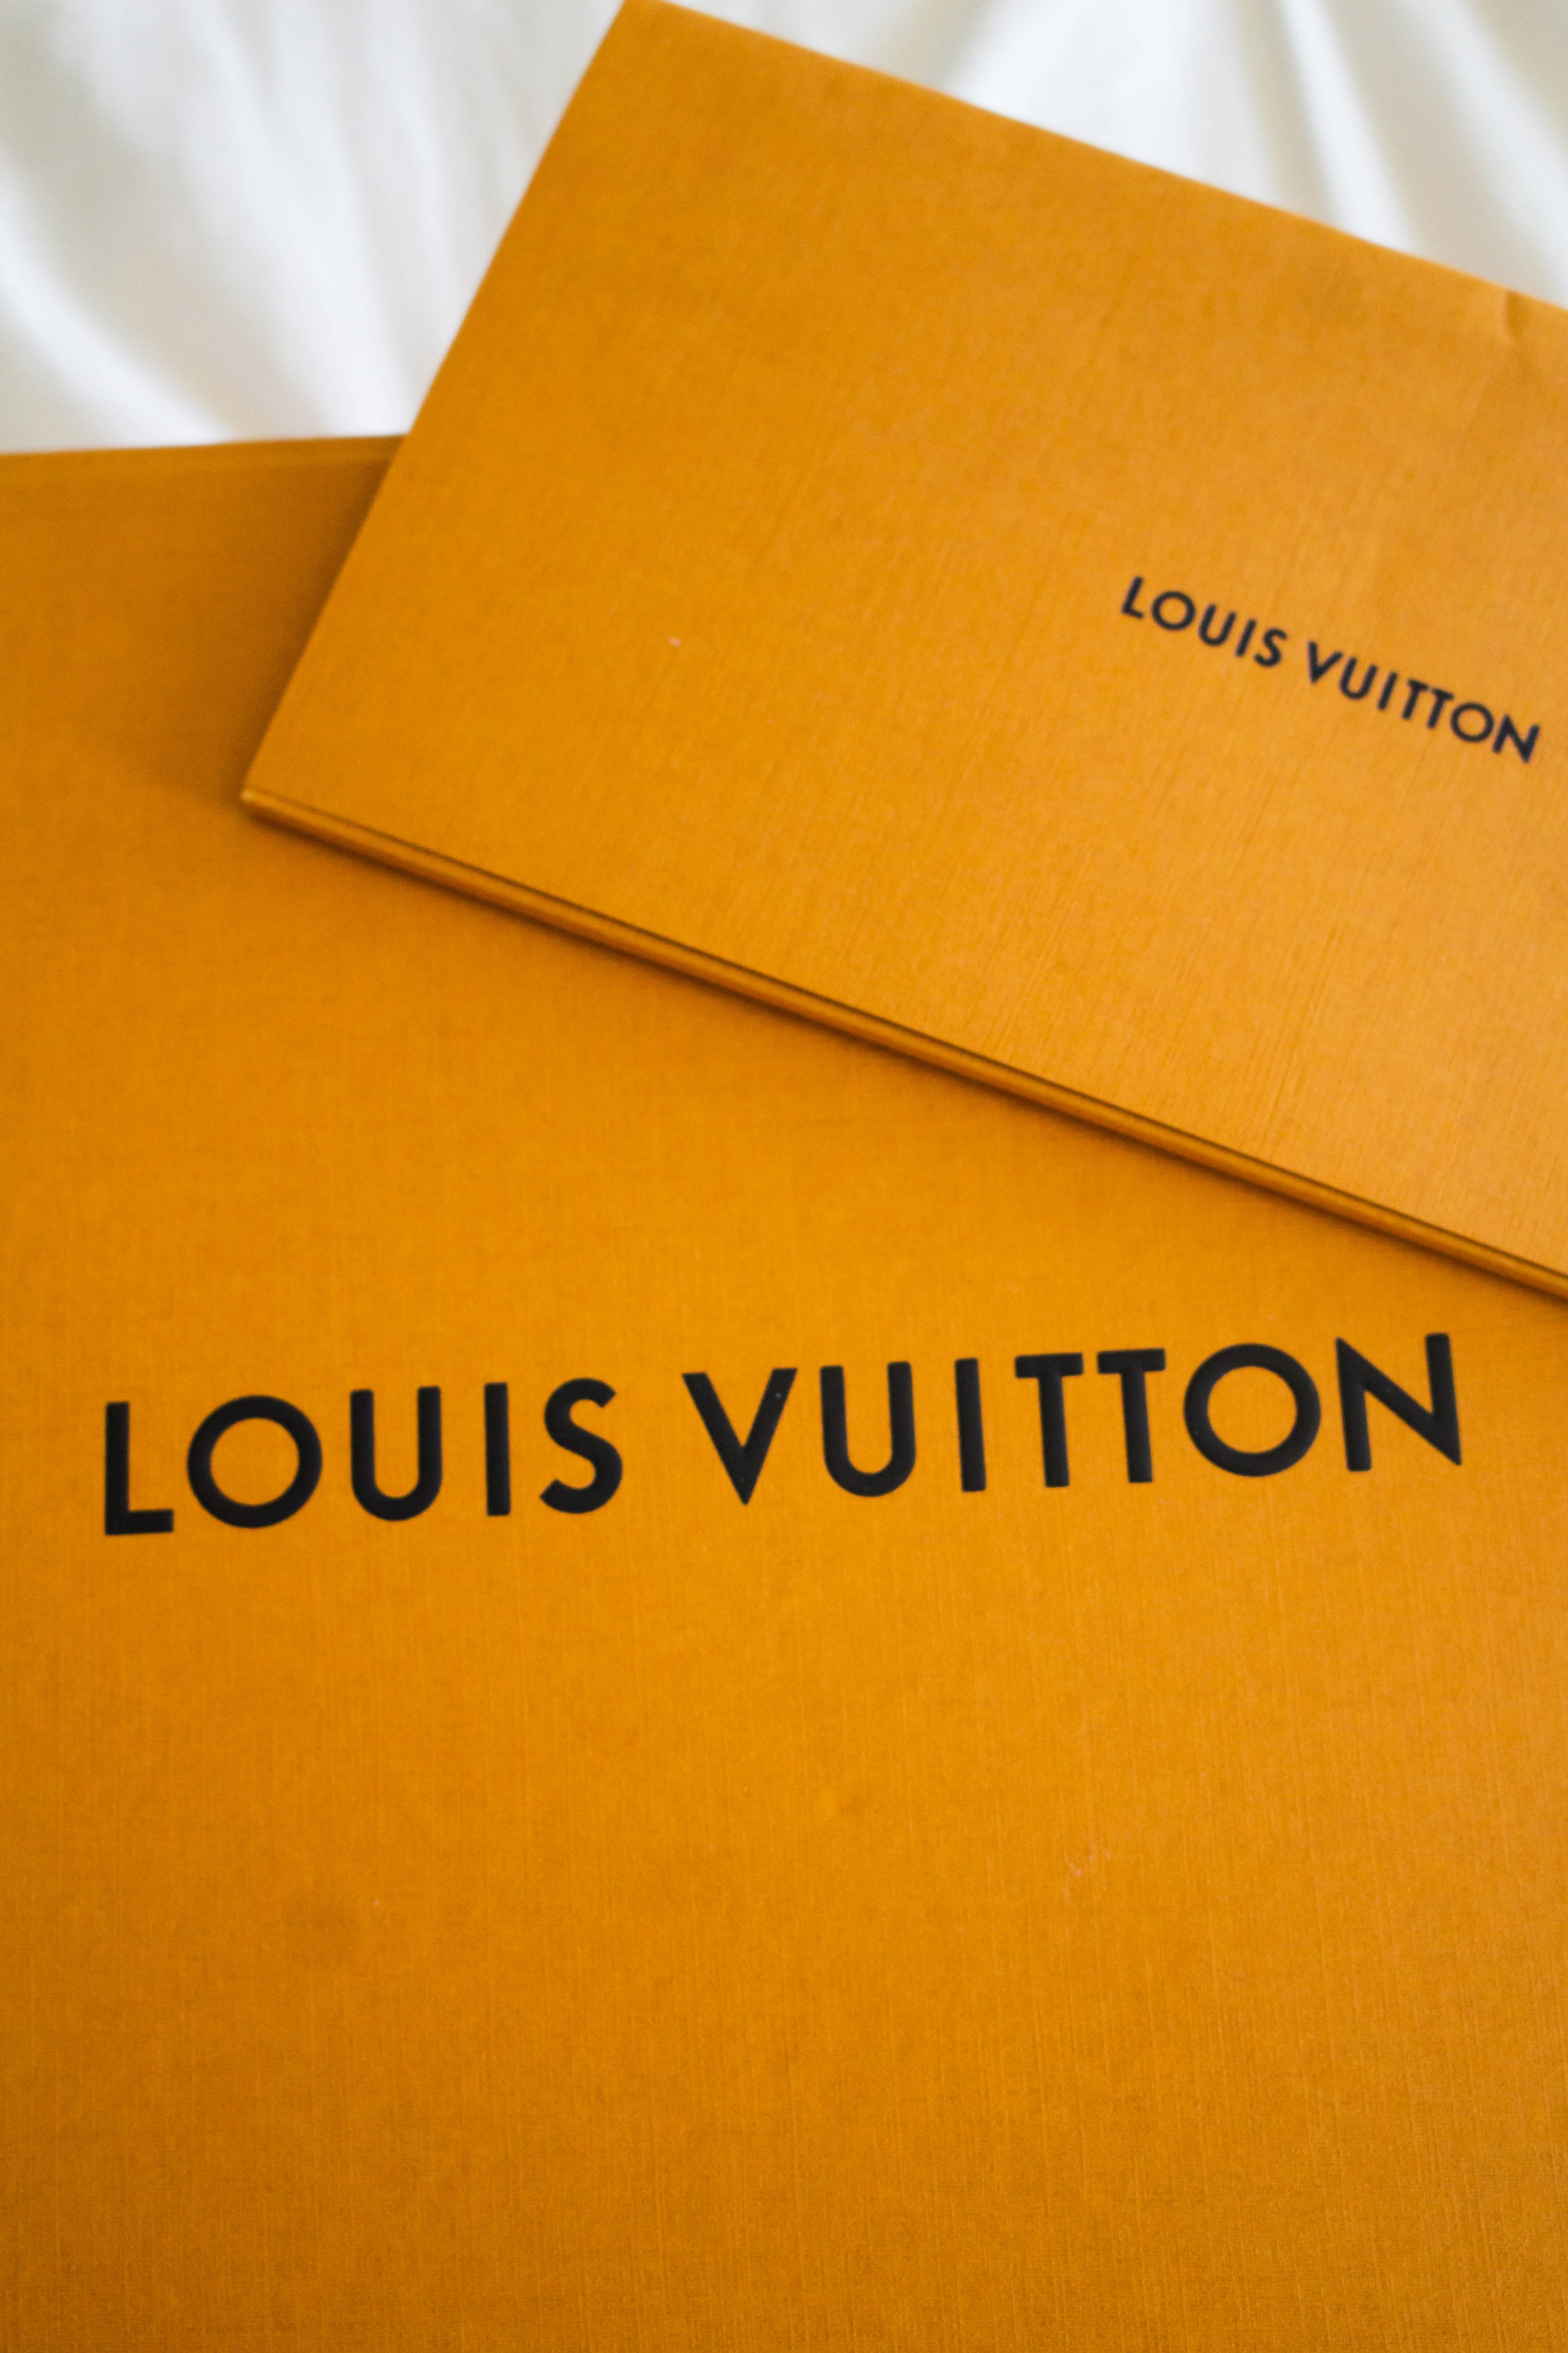 is my louis vuitton real